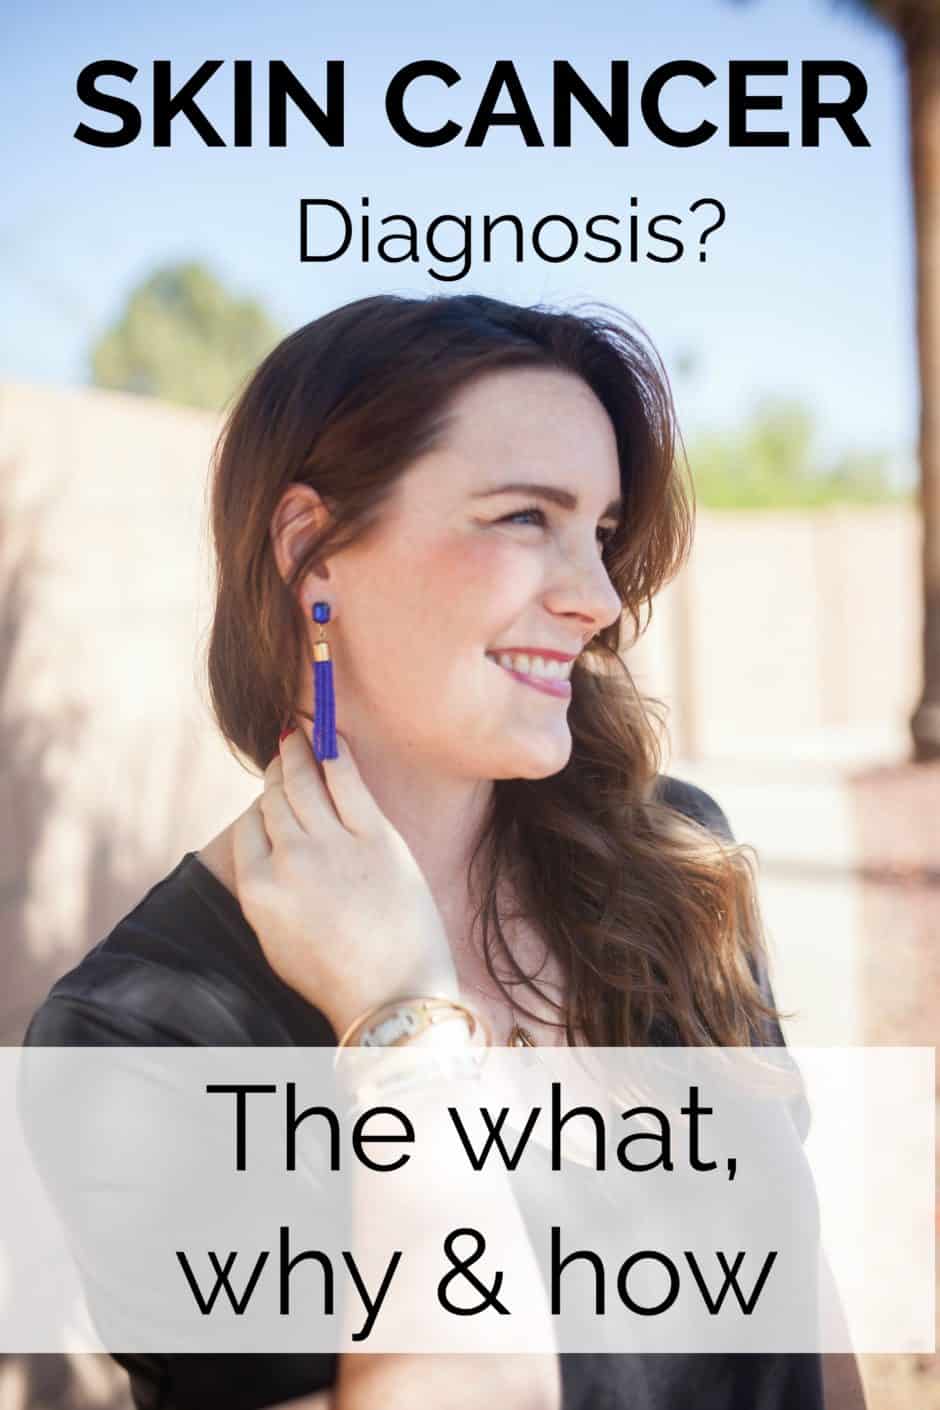 Have you or a loved one received a non melanoma skin cancer diagnosis? It's normal to be confused, frustrated and frightened. Skin cancer is incredibly common and very rarely as serious as it sounds. Learn all about what to expect if a biopsy comes back positive.